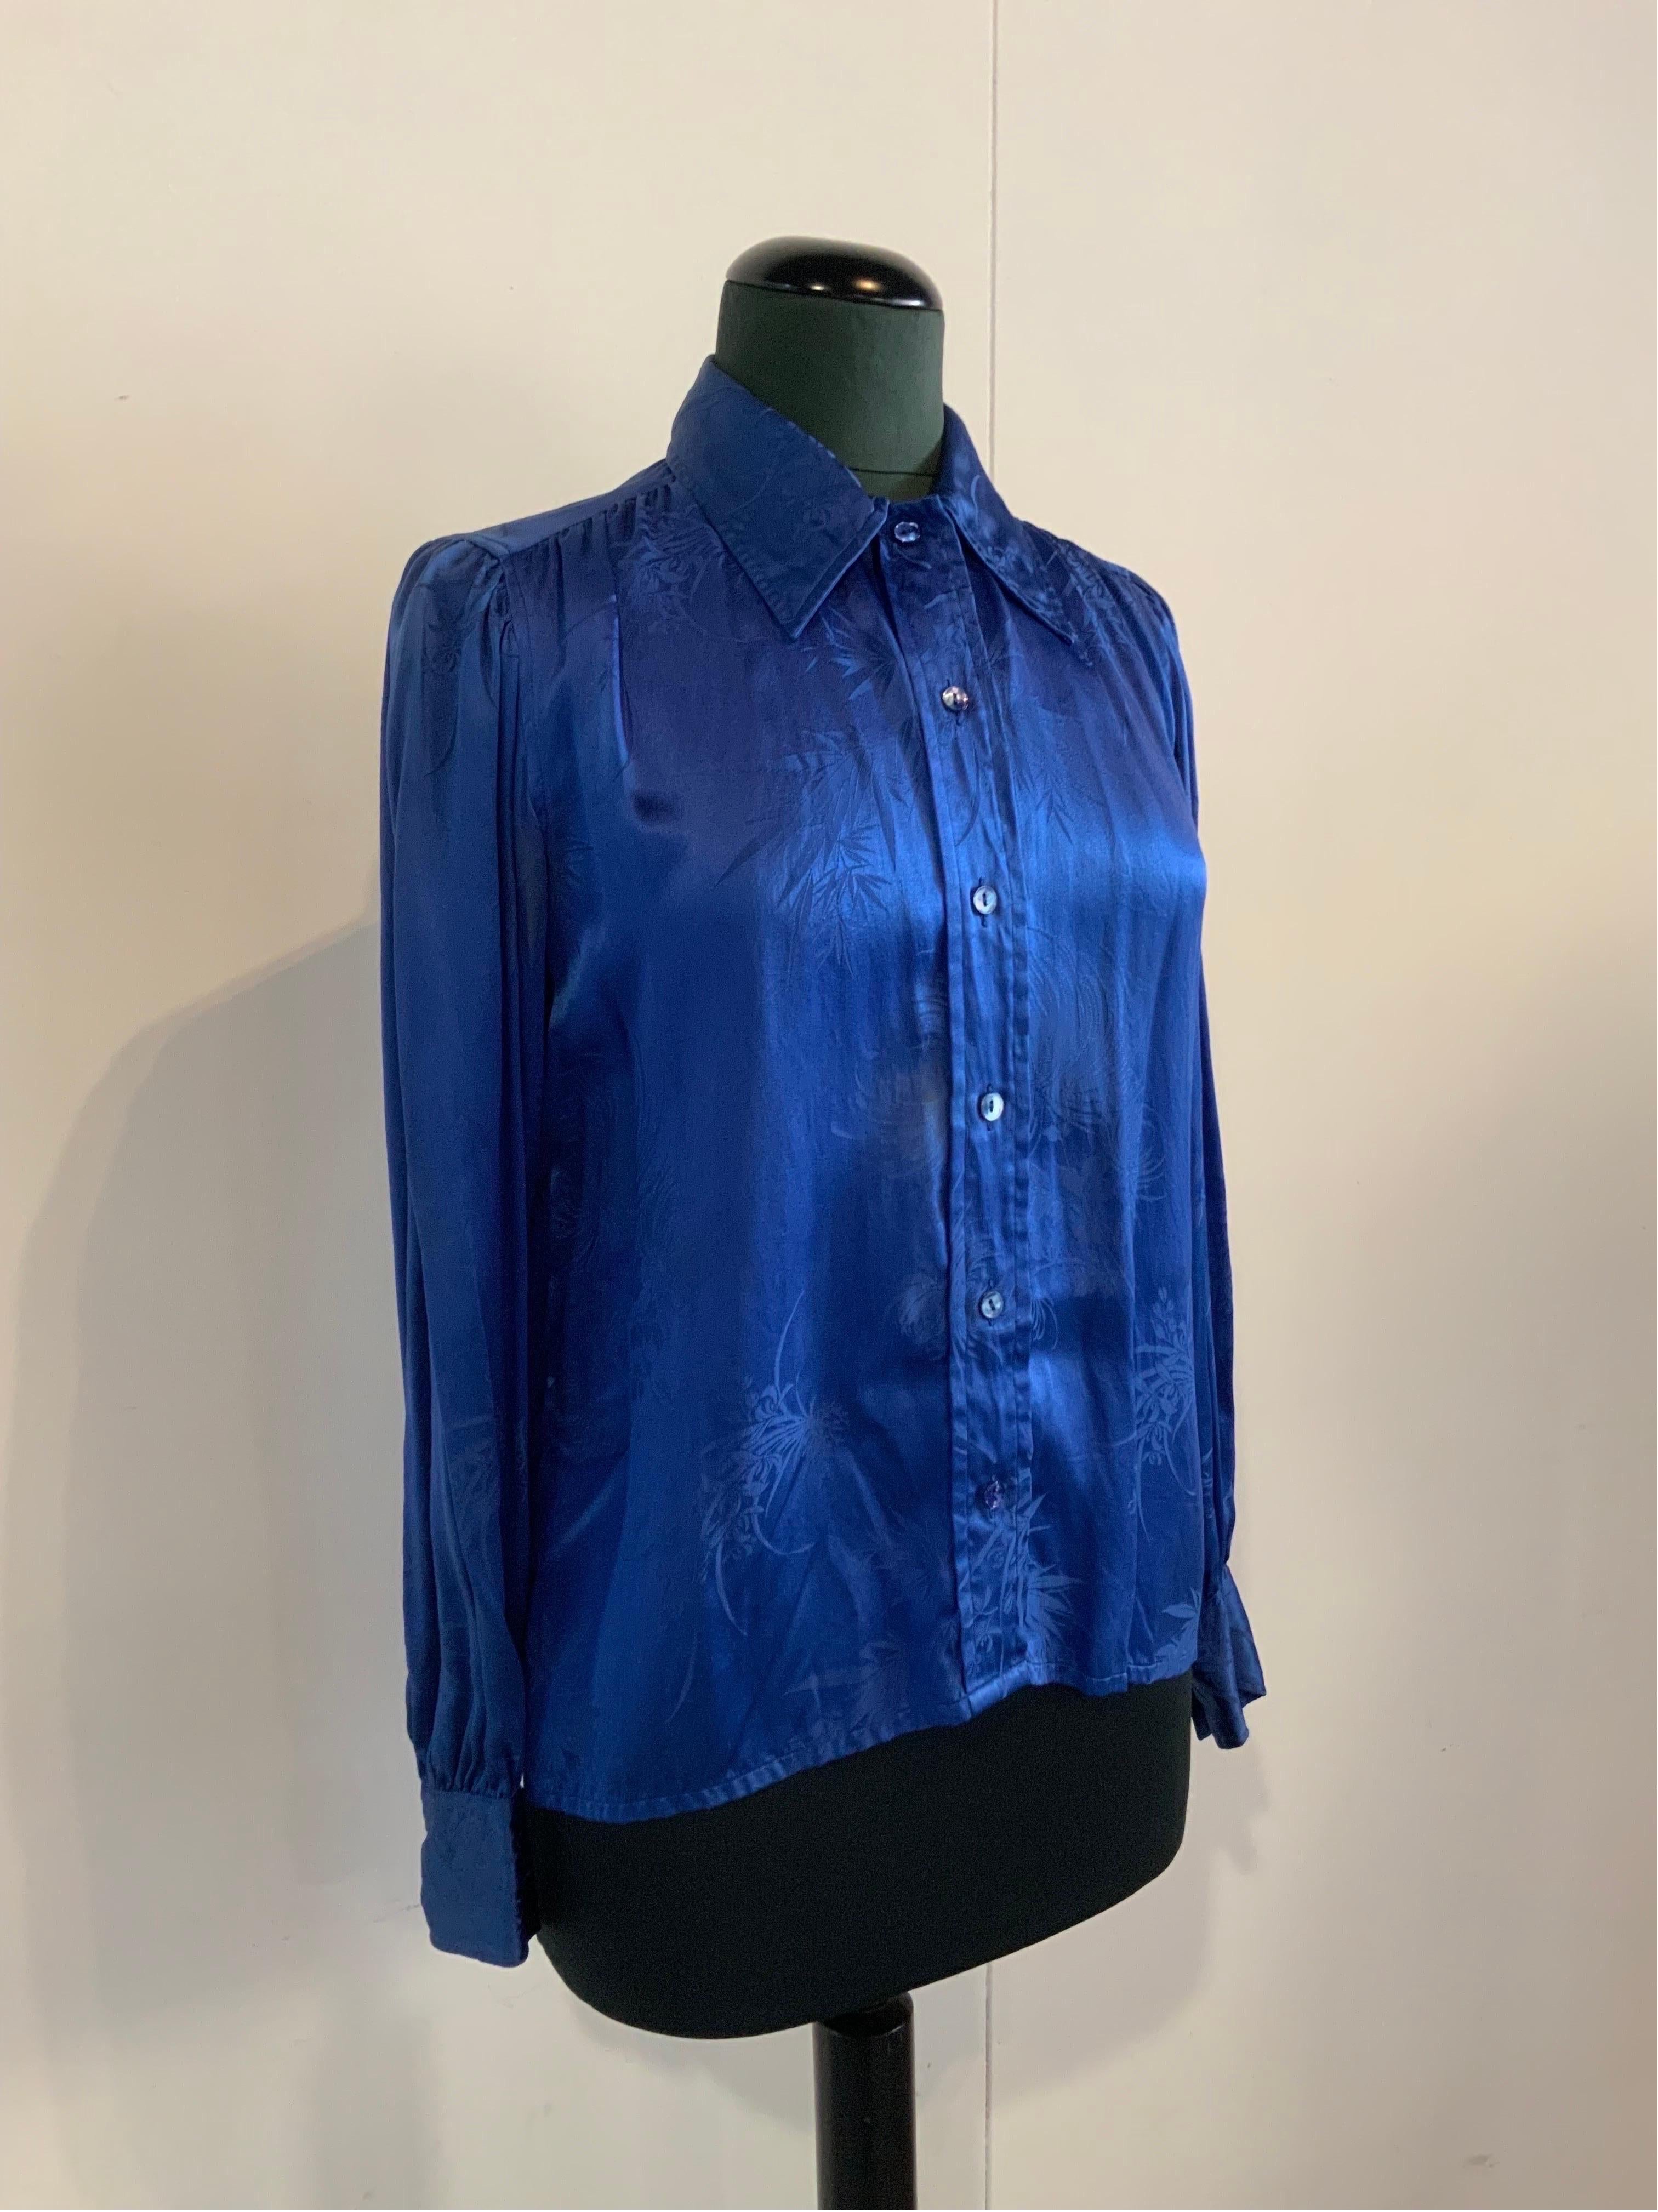 SAINT LAURENT VINTAGE SILK SHIRT.
In silk. Gorgeous floral details.
Vintage garment from the 70s.
Italian size 42
Shoulders 42 cm
Bust 50 cm
Length 64 cm
Sleeve 60 cm
Excellent general condition, shows signs of normal use.